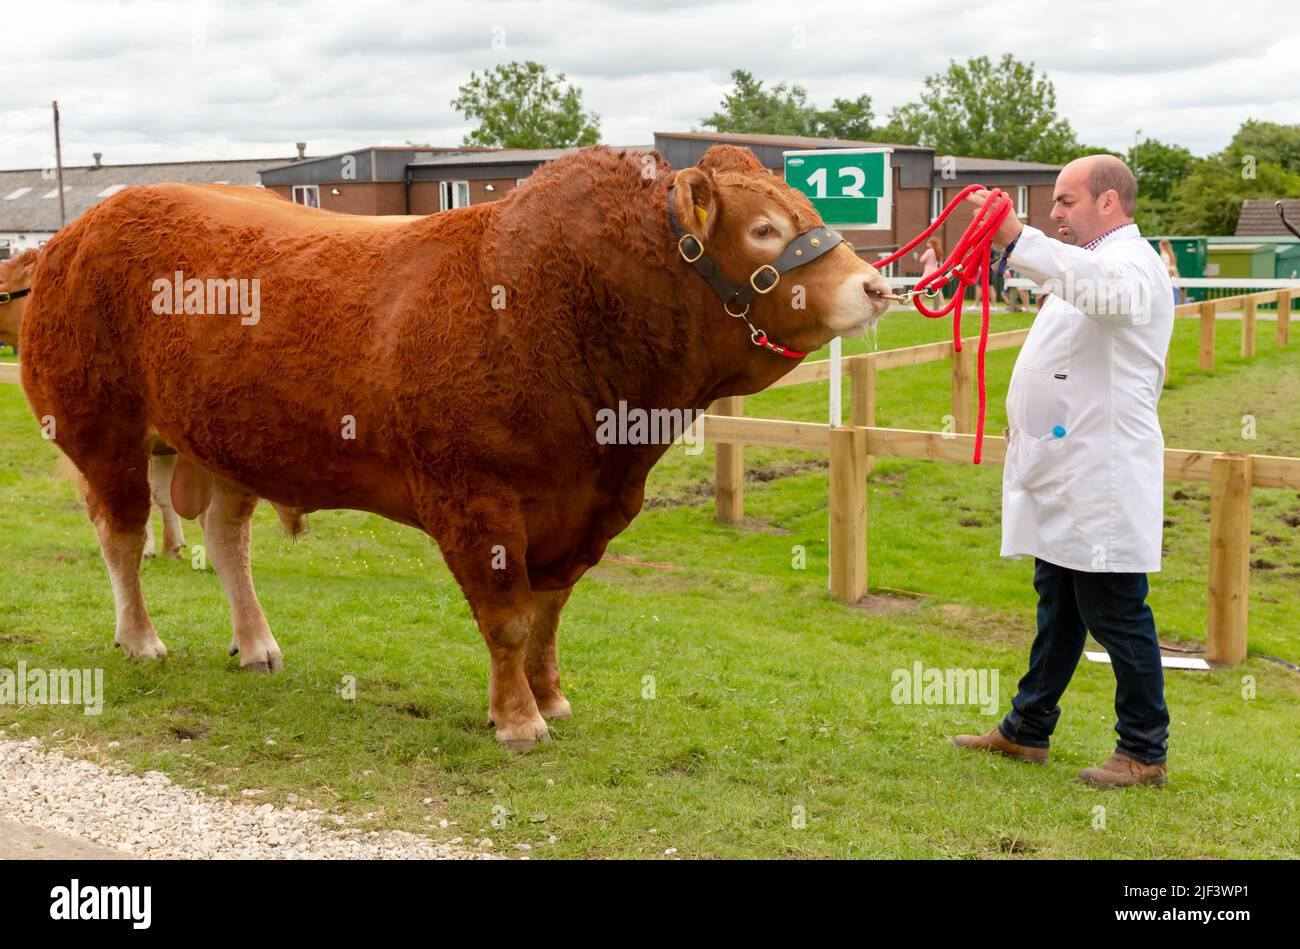 Harrogate, England,  July 15 2021,  Close up of a large Limousin Bull  wearing a leather halter facing the stockman dressed in white coat holding the Stock Photo